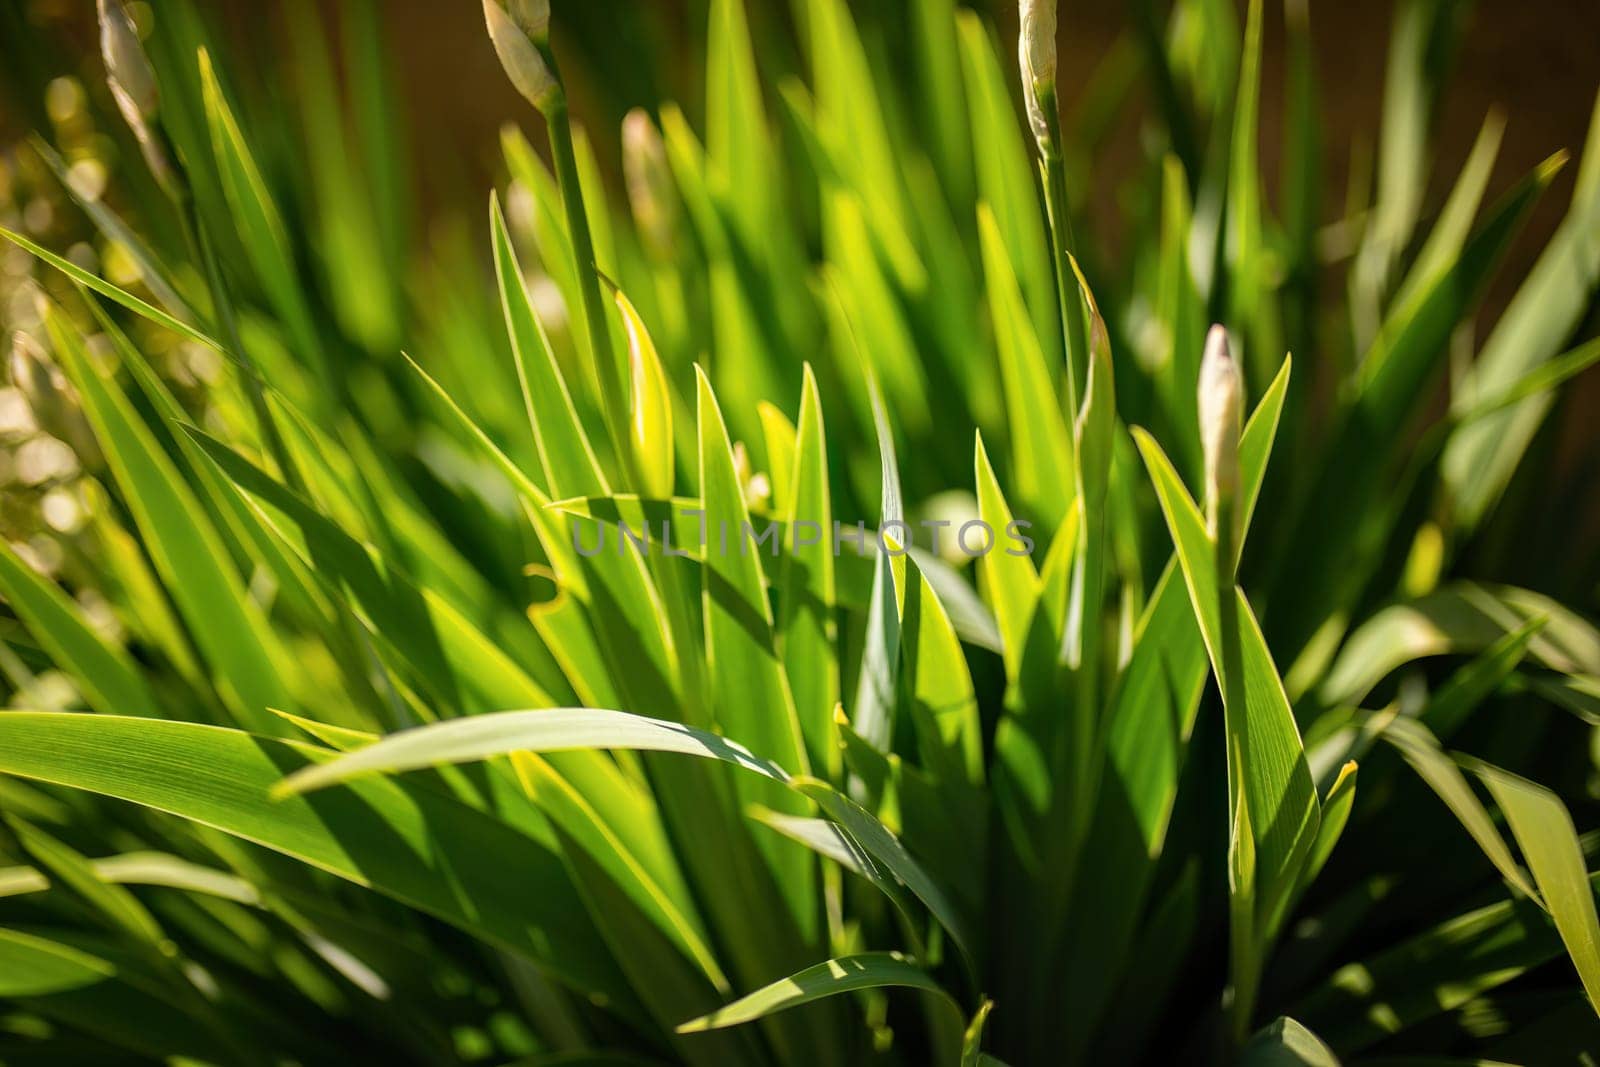 Close Up of a Plant With Green Leaves by pippocarlot